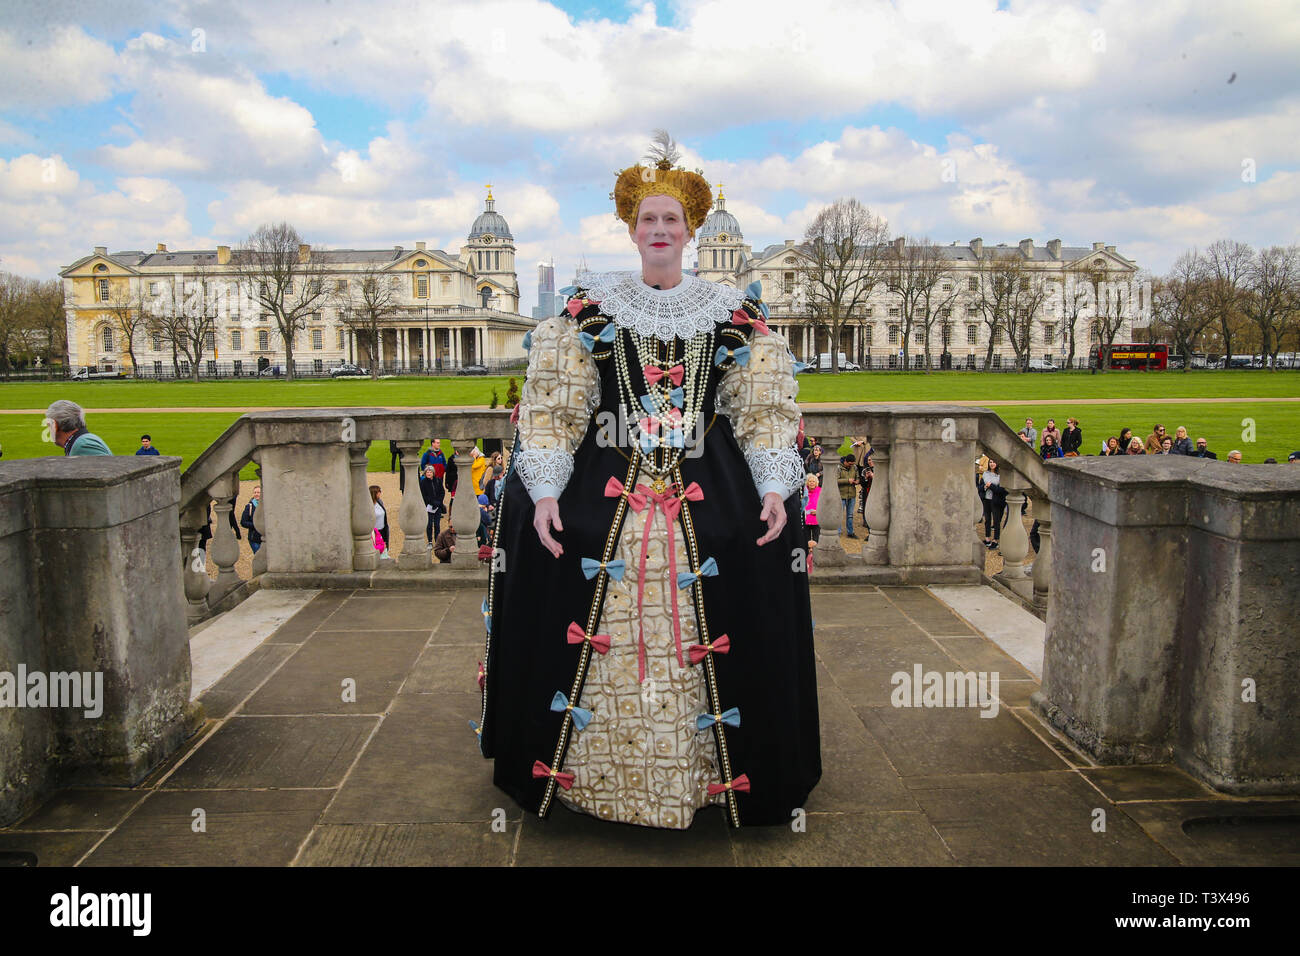 London, UK. 12th Apr, 2019.  Christopher Green English writer and performer whose work covers comedy, cabaret, theater and Live Art took on the role of Elizabeth I in a grand procession from the Queen's House to the National Portrait Gallery.Here, Christopher Green transformed into the icon of Elizabeth I. Construction of an Icon is a performance, a creative design and a communities' project, which offers new ways to share histories of Elizabeth I, and disseminate the iconic Armada Portrait with new audiences. Credit: Paul Quezada-Neiman/Alamy Live News Stock Photo